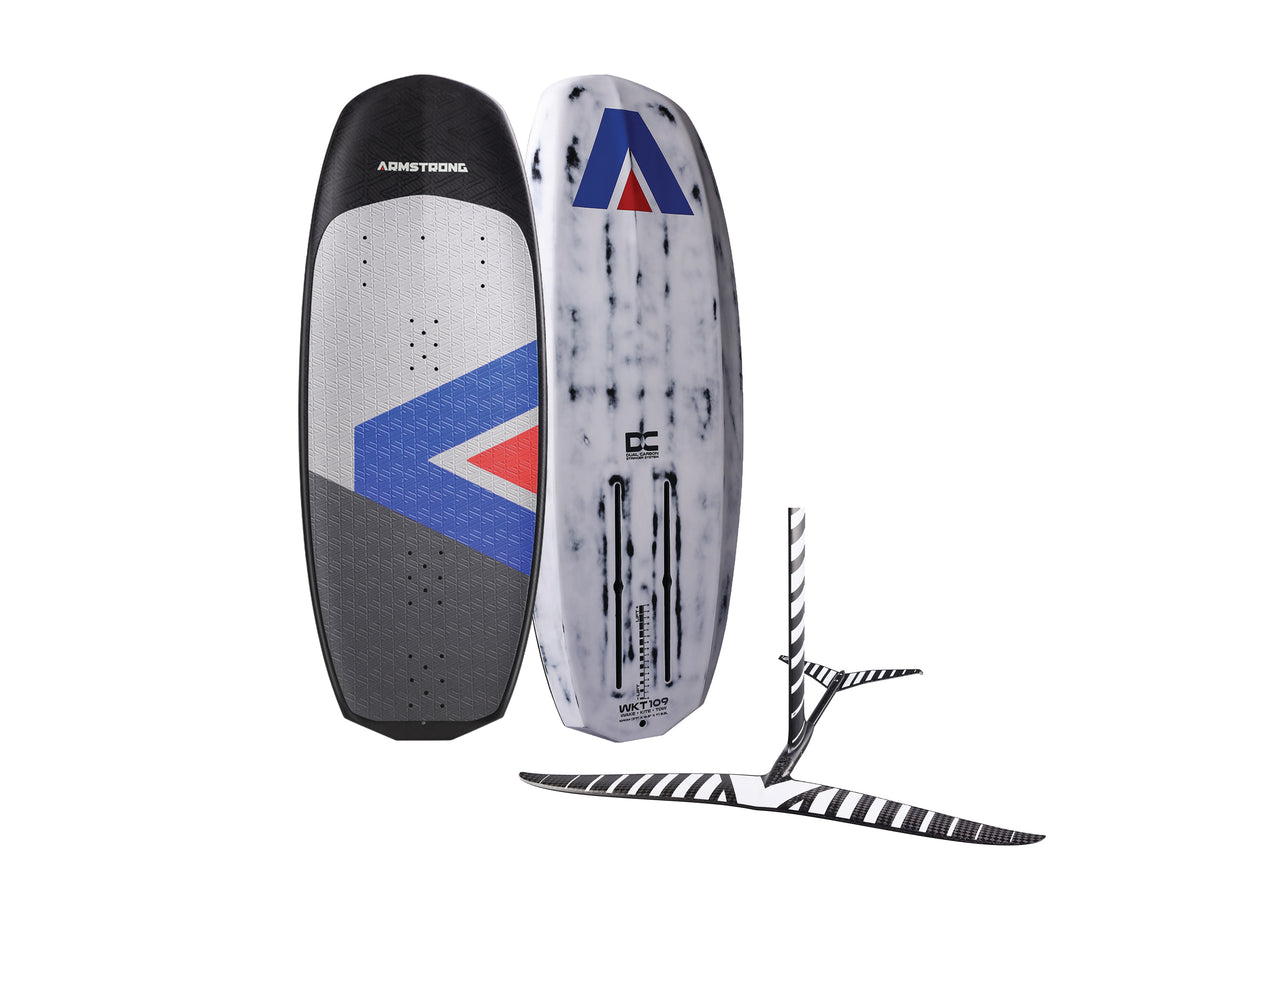 Armstrong Wakefoil Board W/ Armstrong HA1125 Foil Kit Package